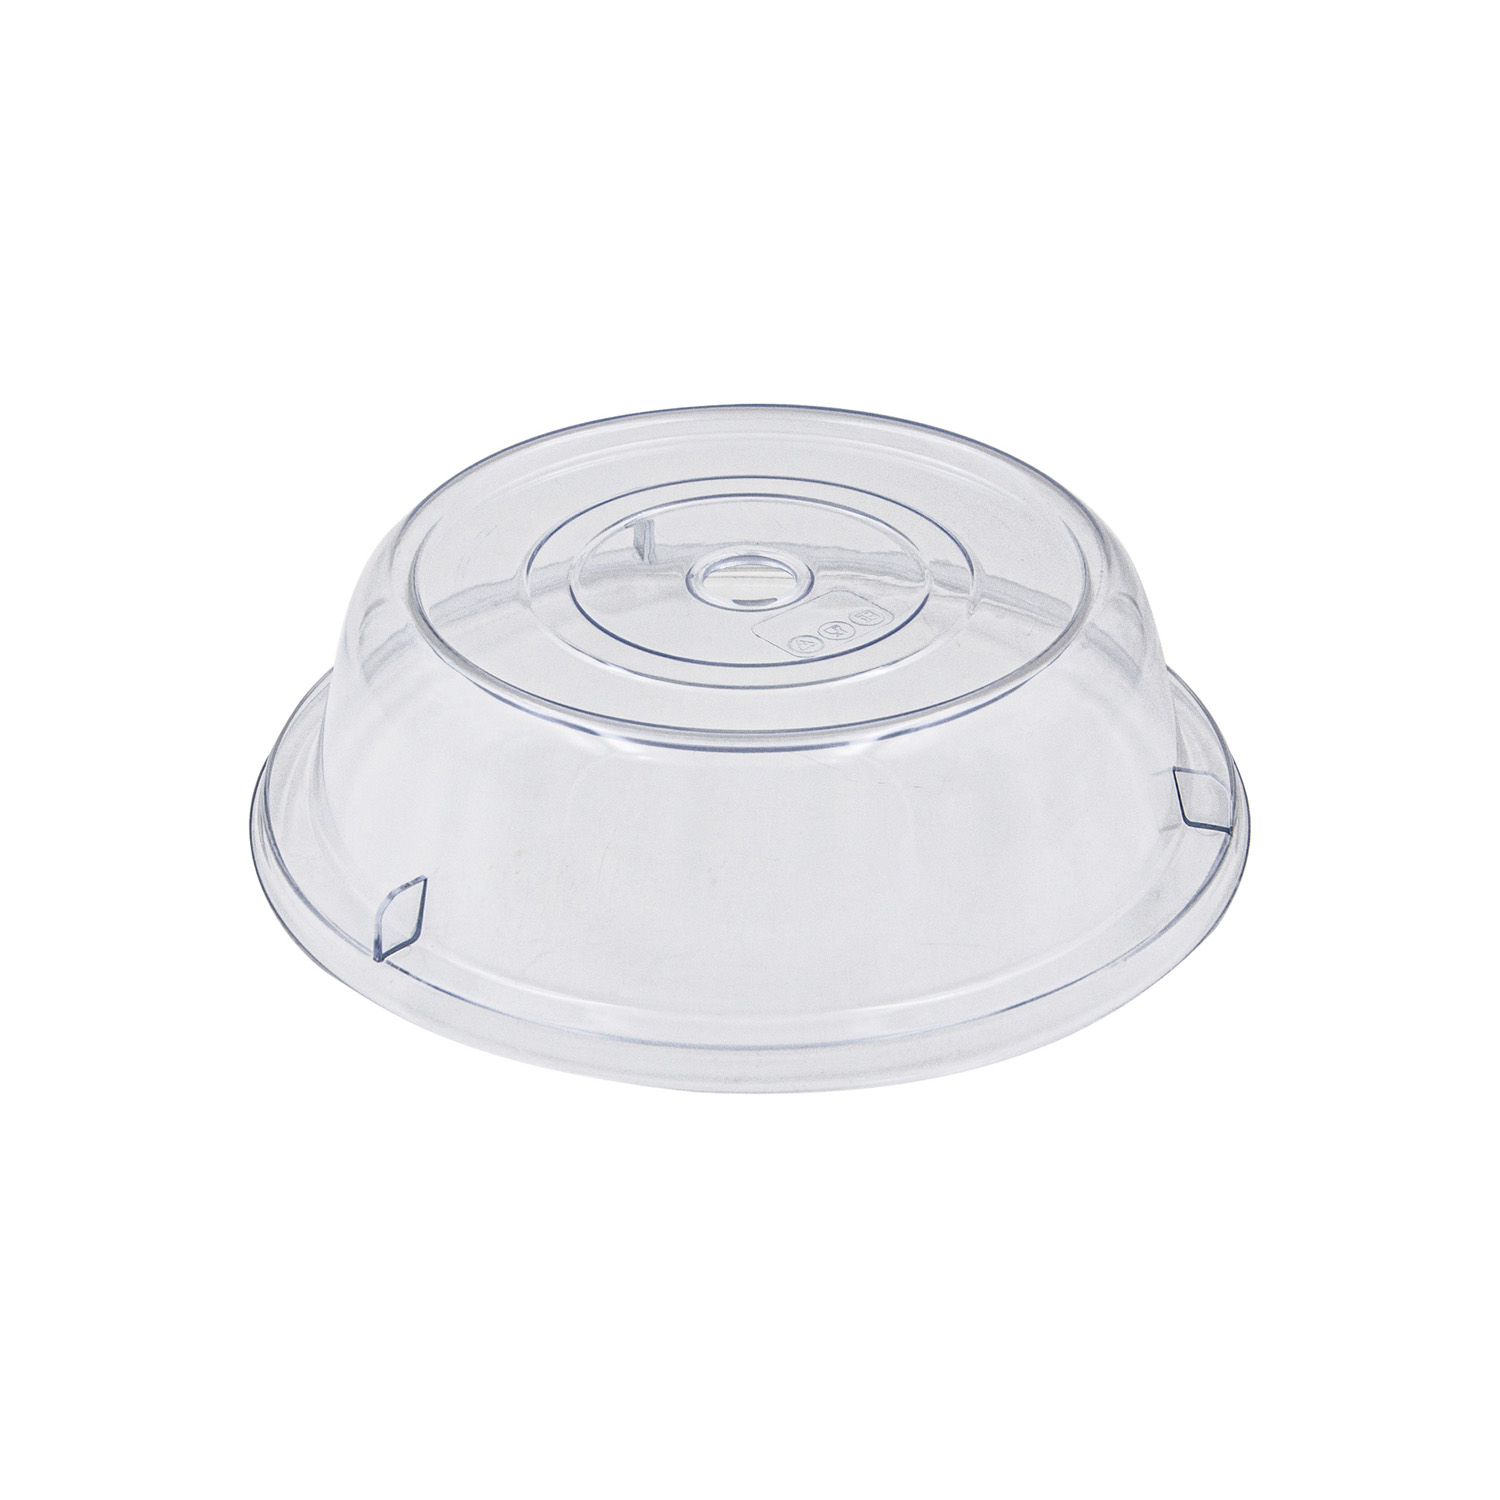 CAC China PPCO-21 Clear Polycarbonate Round Plate Cover 12"Dia